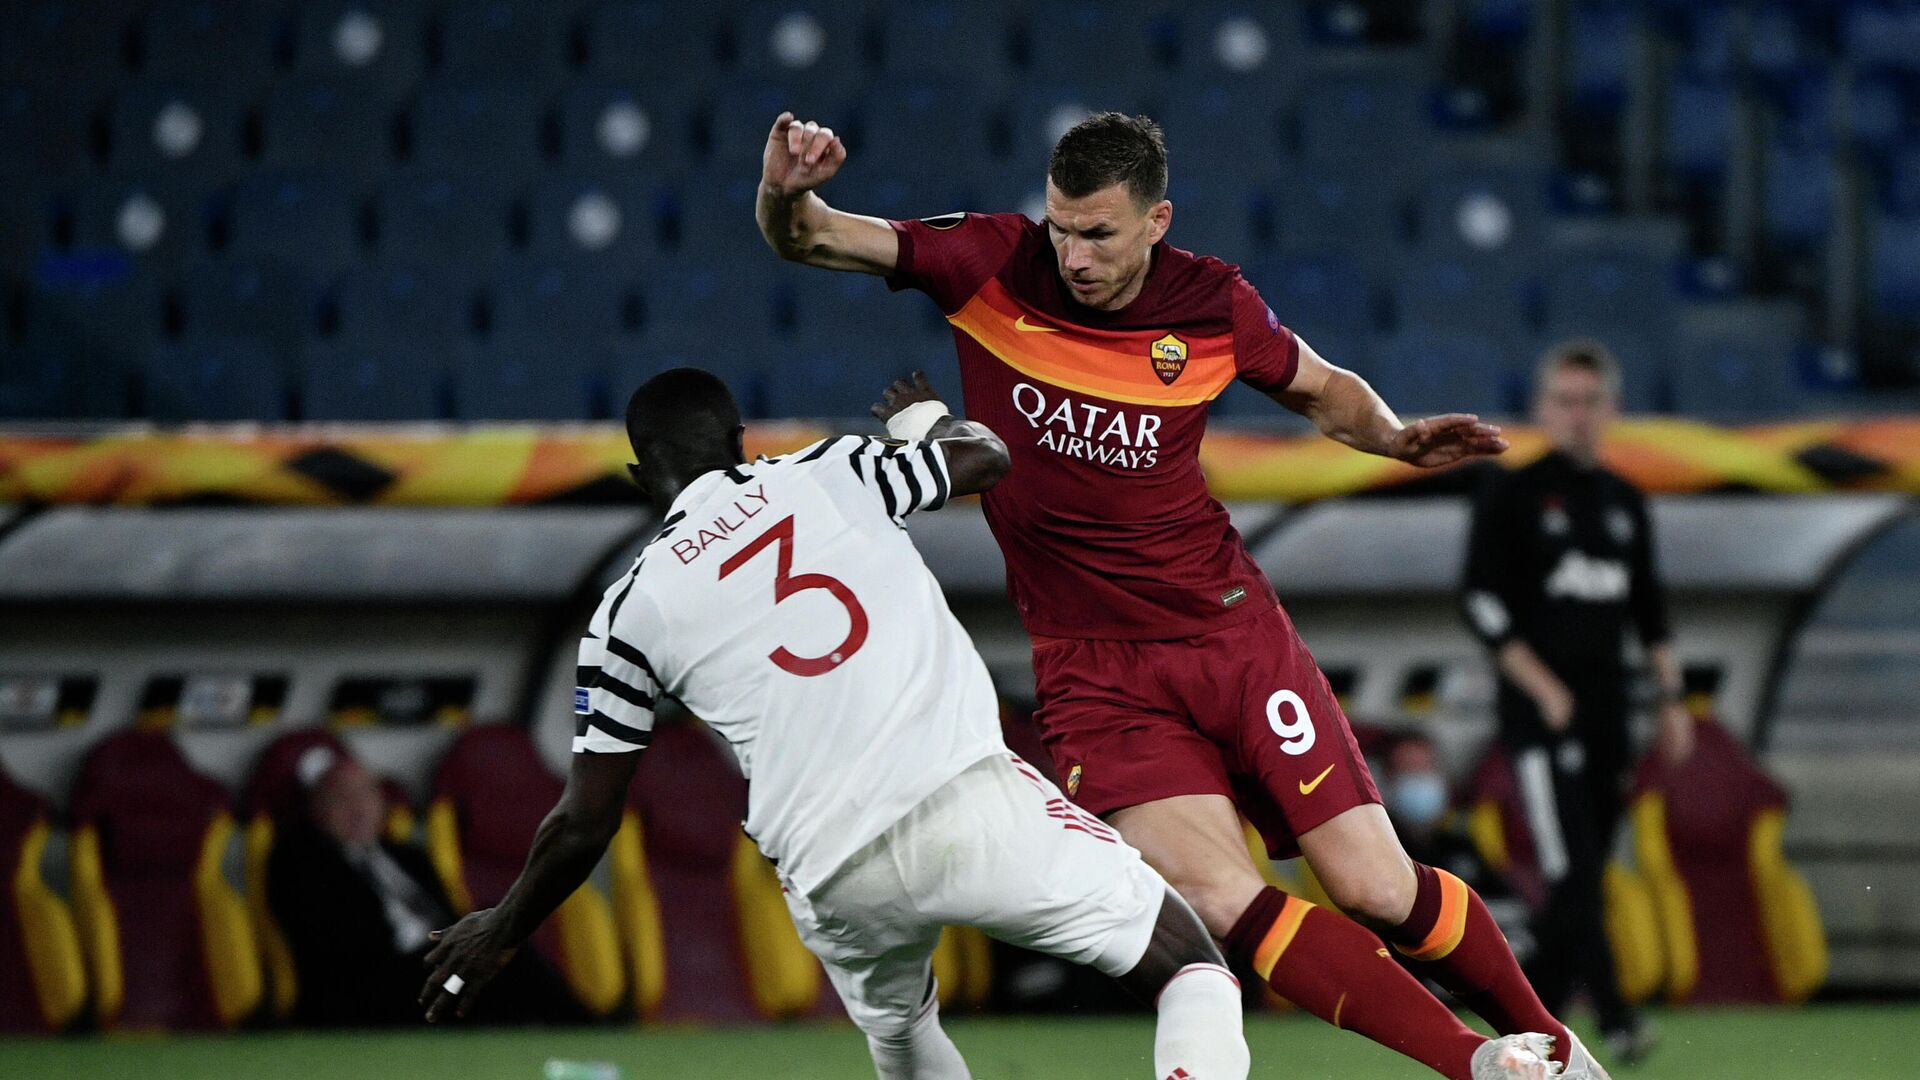 Roma's Bosnian forward Edin Dzeko (R) fights for the ball with Manchester United's Ivorian defender Eric Bailly during the UEFA Europa League semi-final second leg football match between AS Roma and Manchester United at the Olympic Stadium in Rome, on May 6, 2021. (Photo by Filippo MONTEFORTE / AFP) - РИА Новости, 1920, 06.05.2021